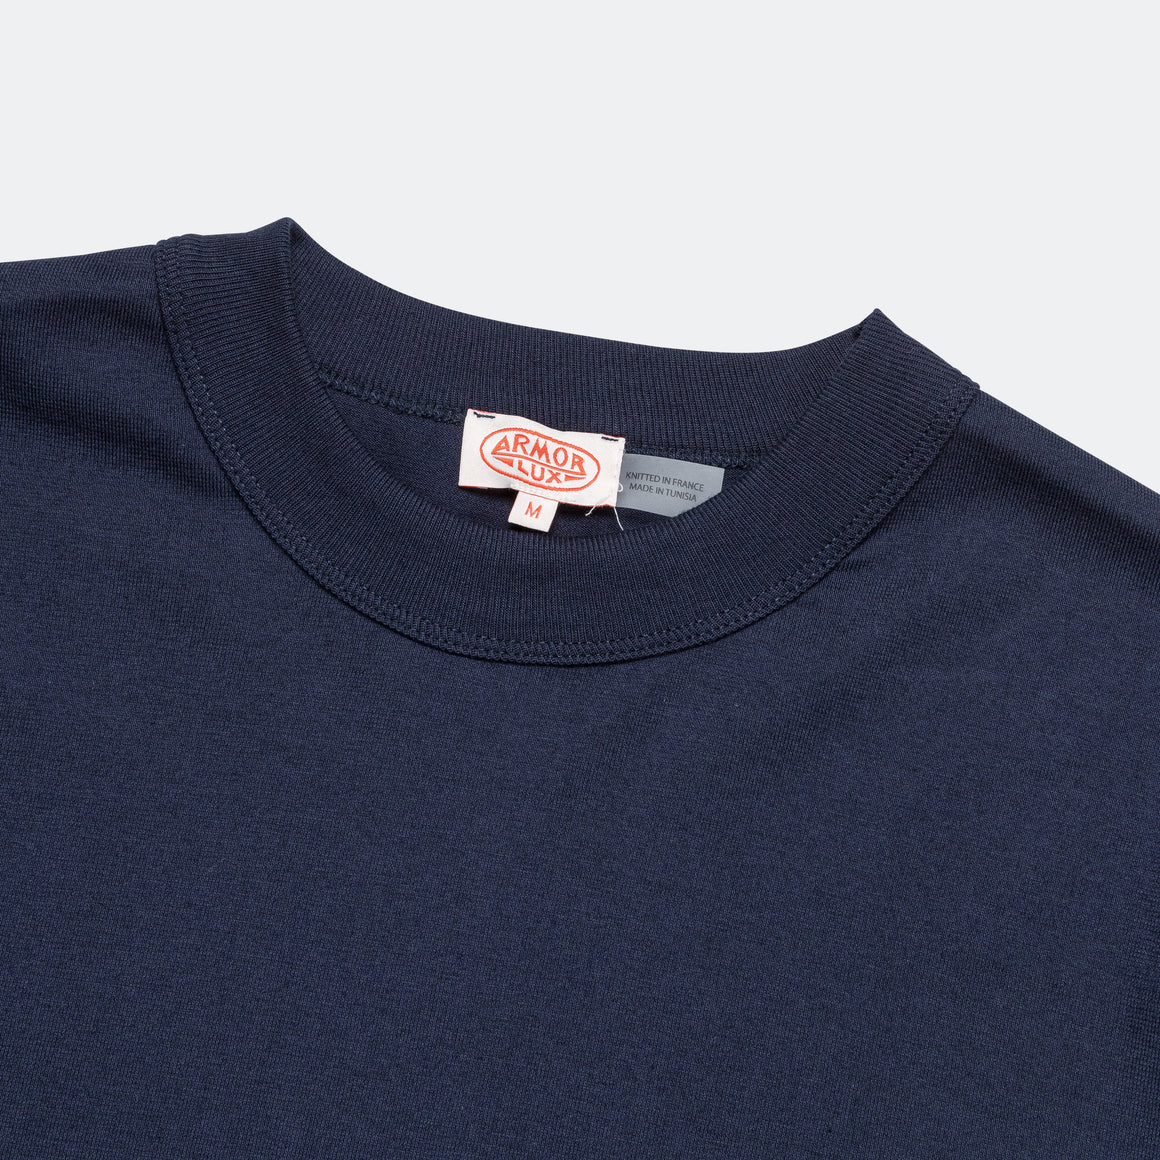 Armor Lux - Heritage T-Shirt - Navy - UP THERE